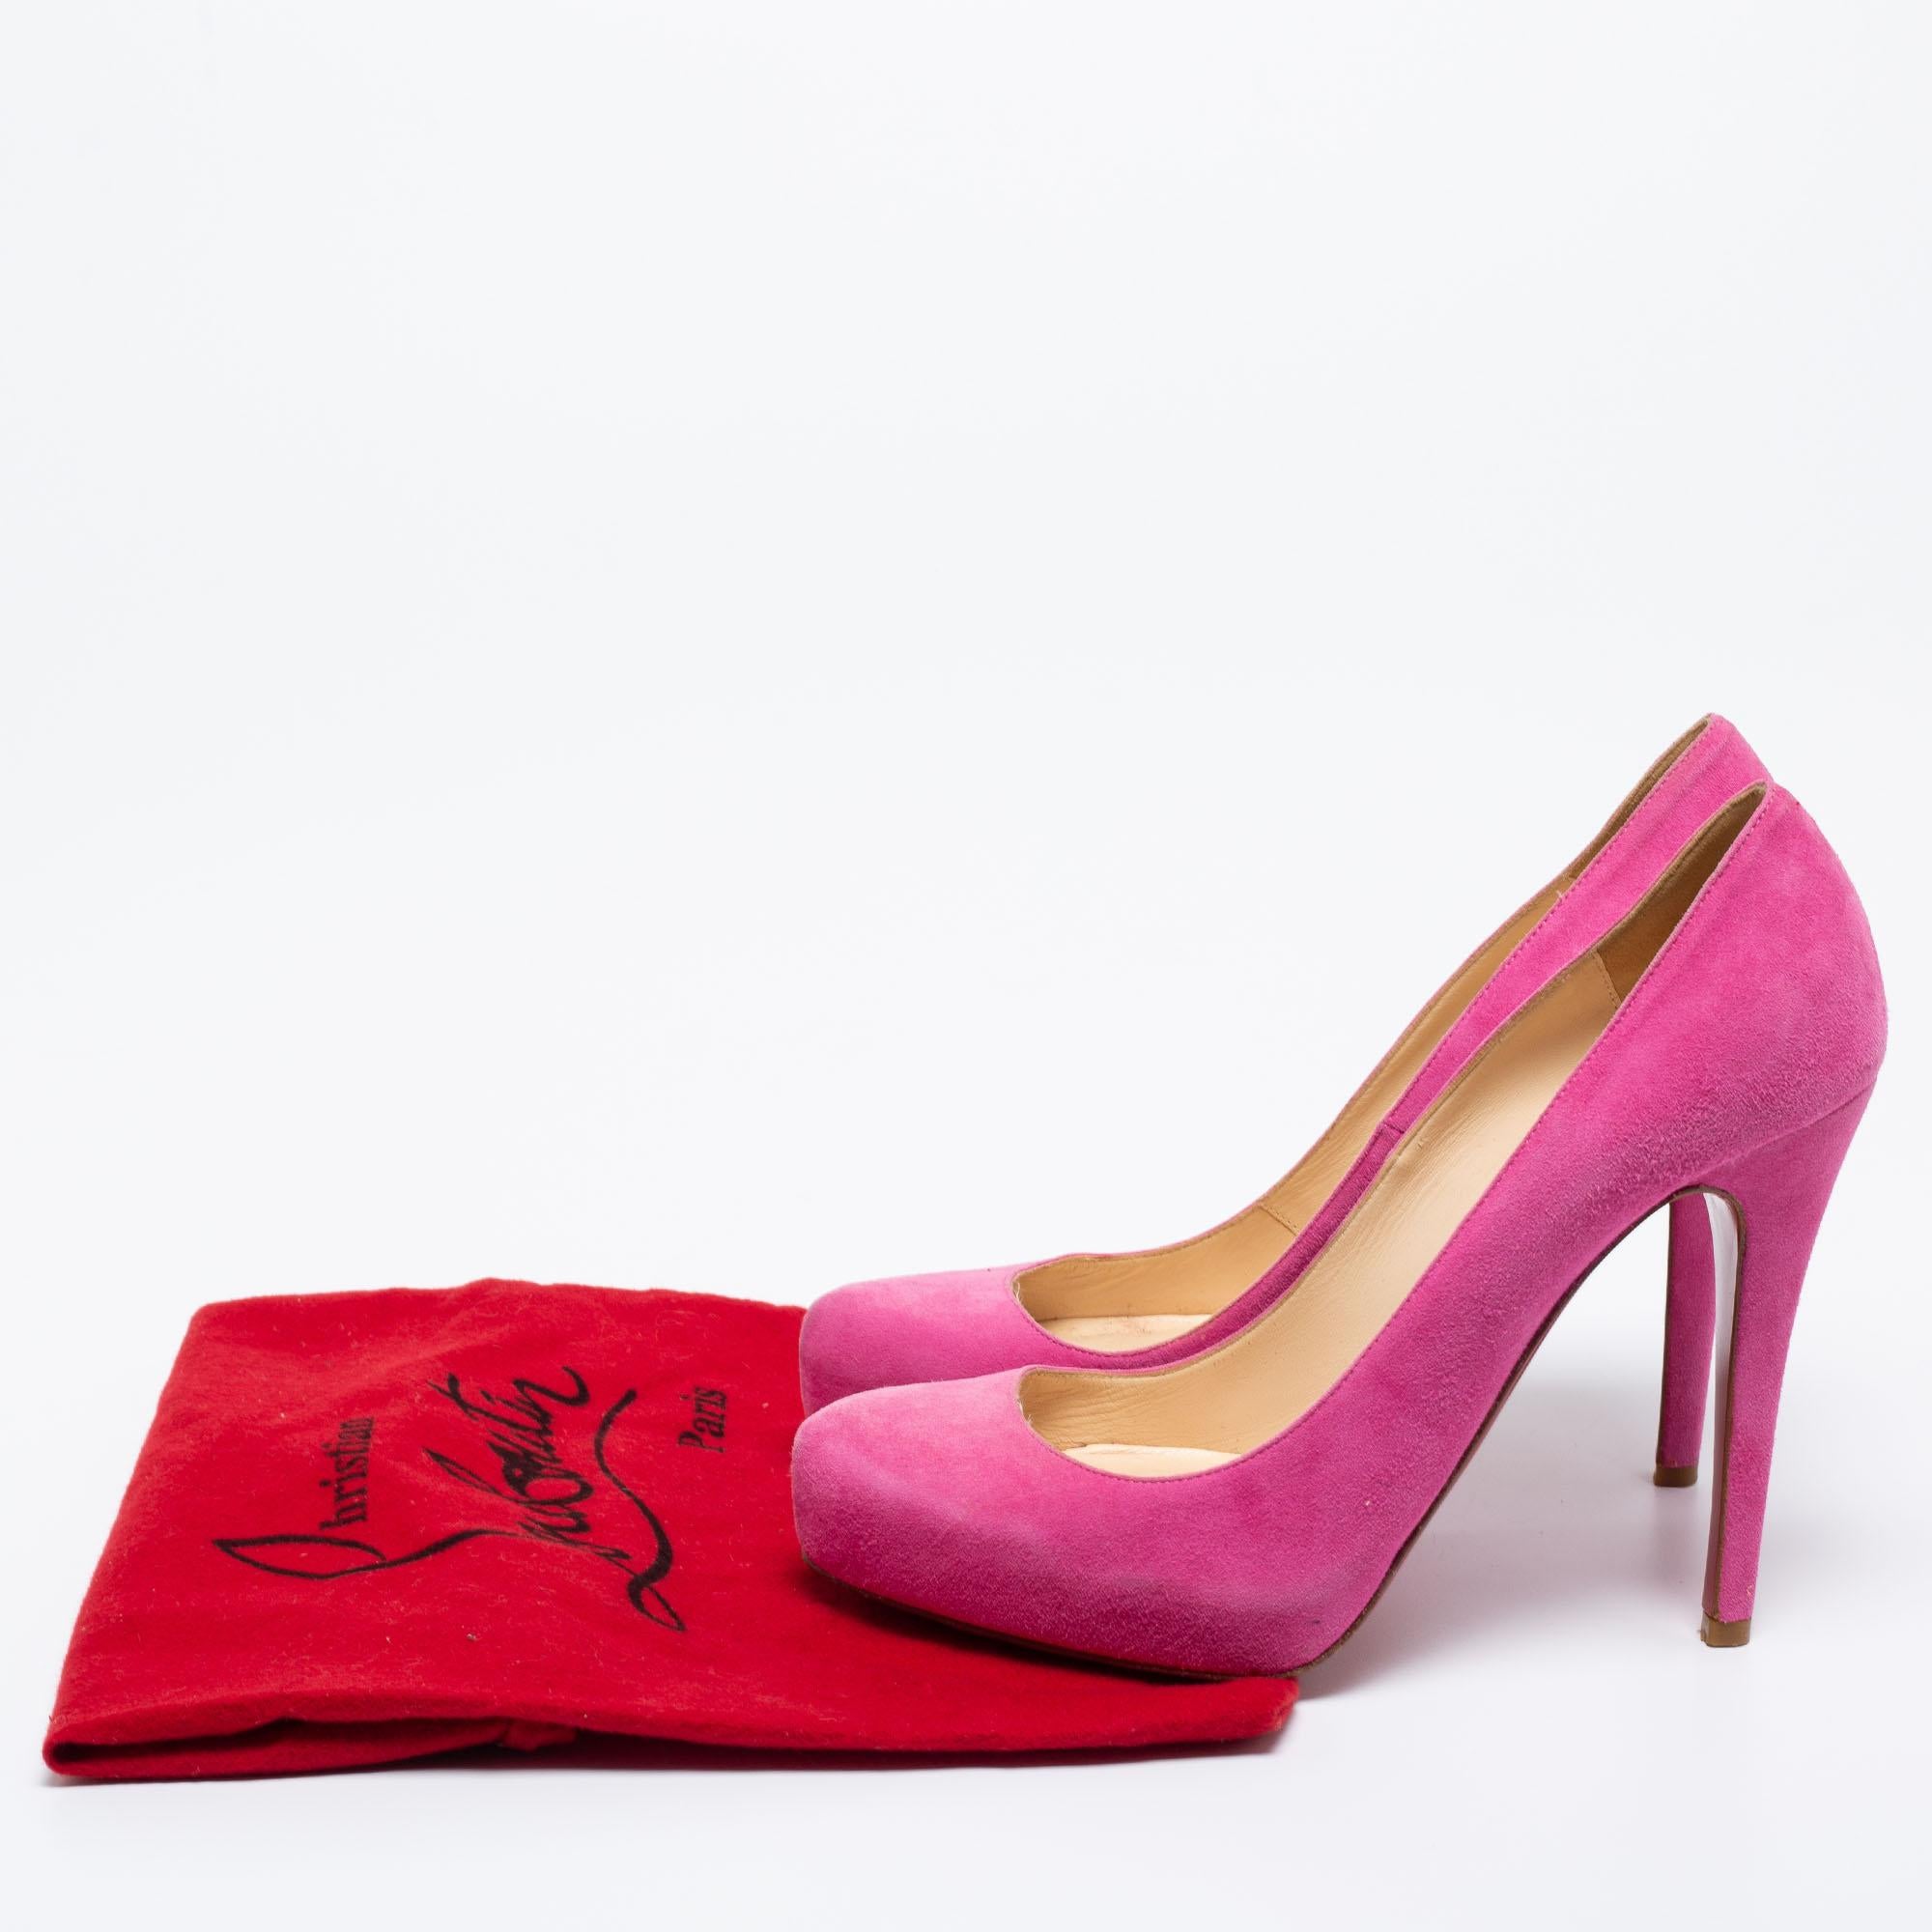 Christian Louboutin Pink Suede Elisa Pumps Size 38.5 For Sale 2